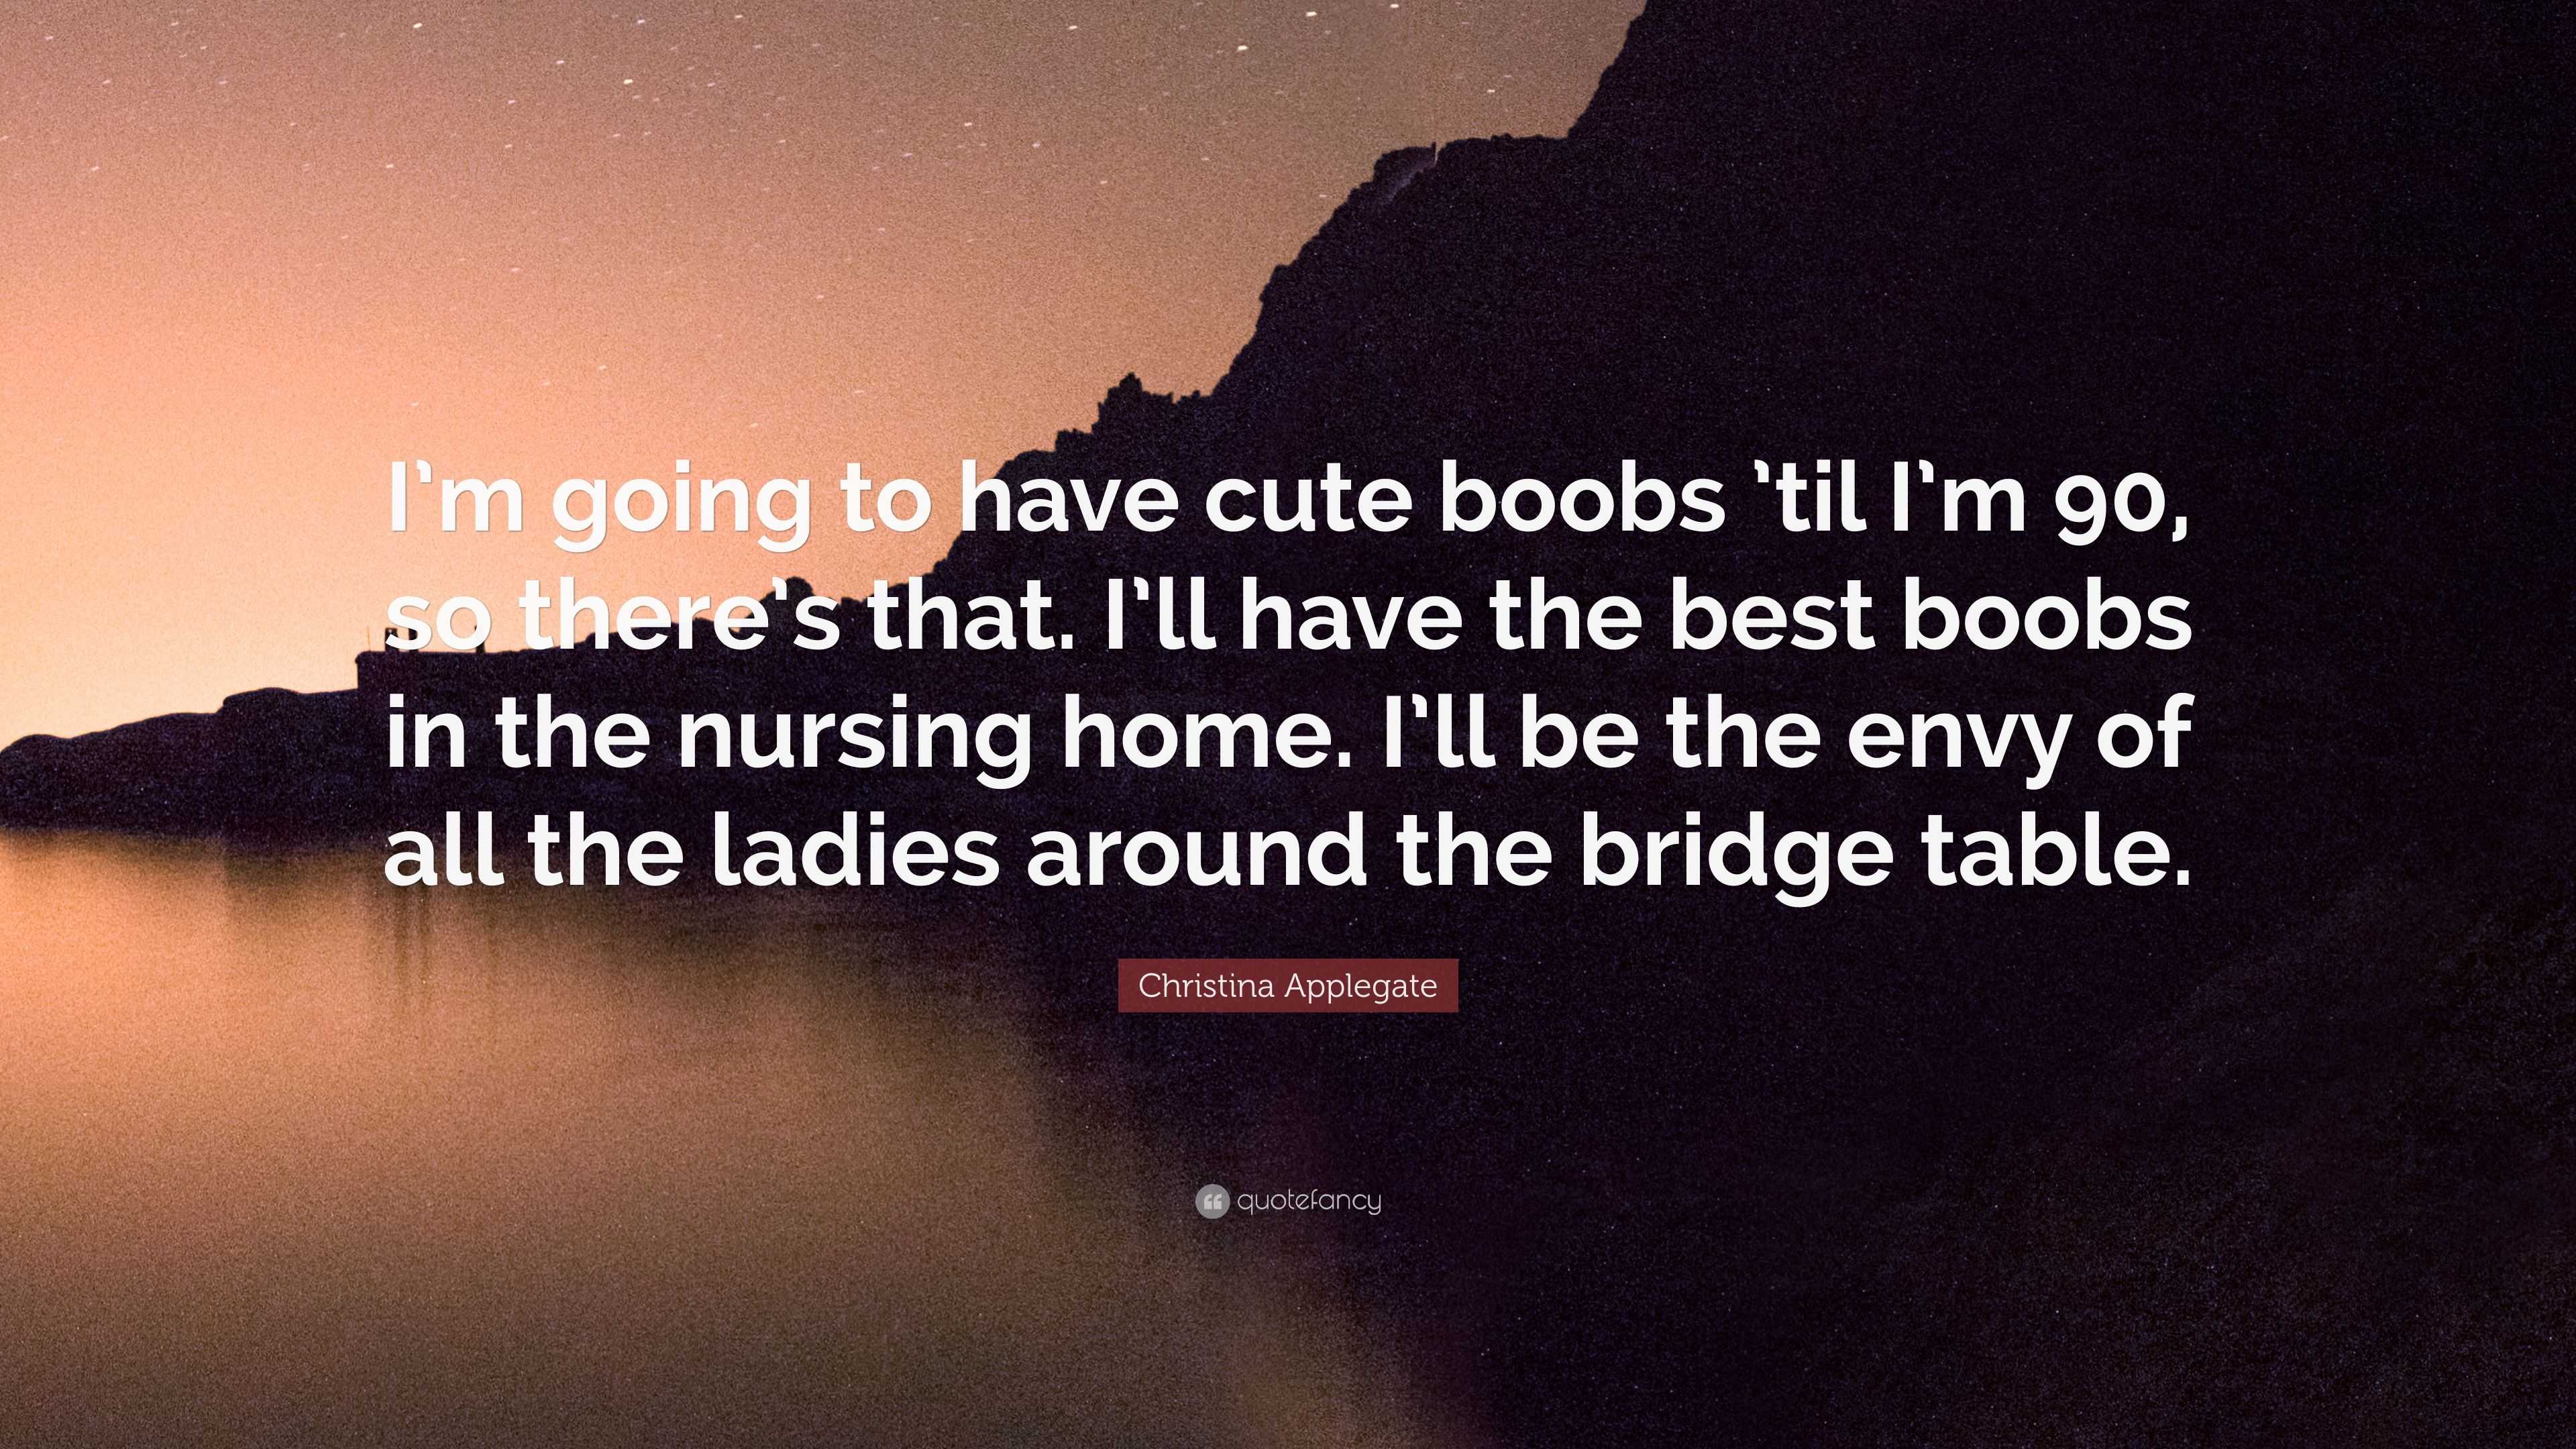 https://quotefancy.com/media/wallpaper/3840x2160/3059734-Christina-Applegate-Quote-I-m-going-to-have-cute-boobs-til-I-m-90.jpg